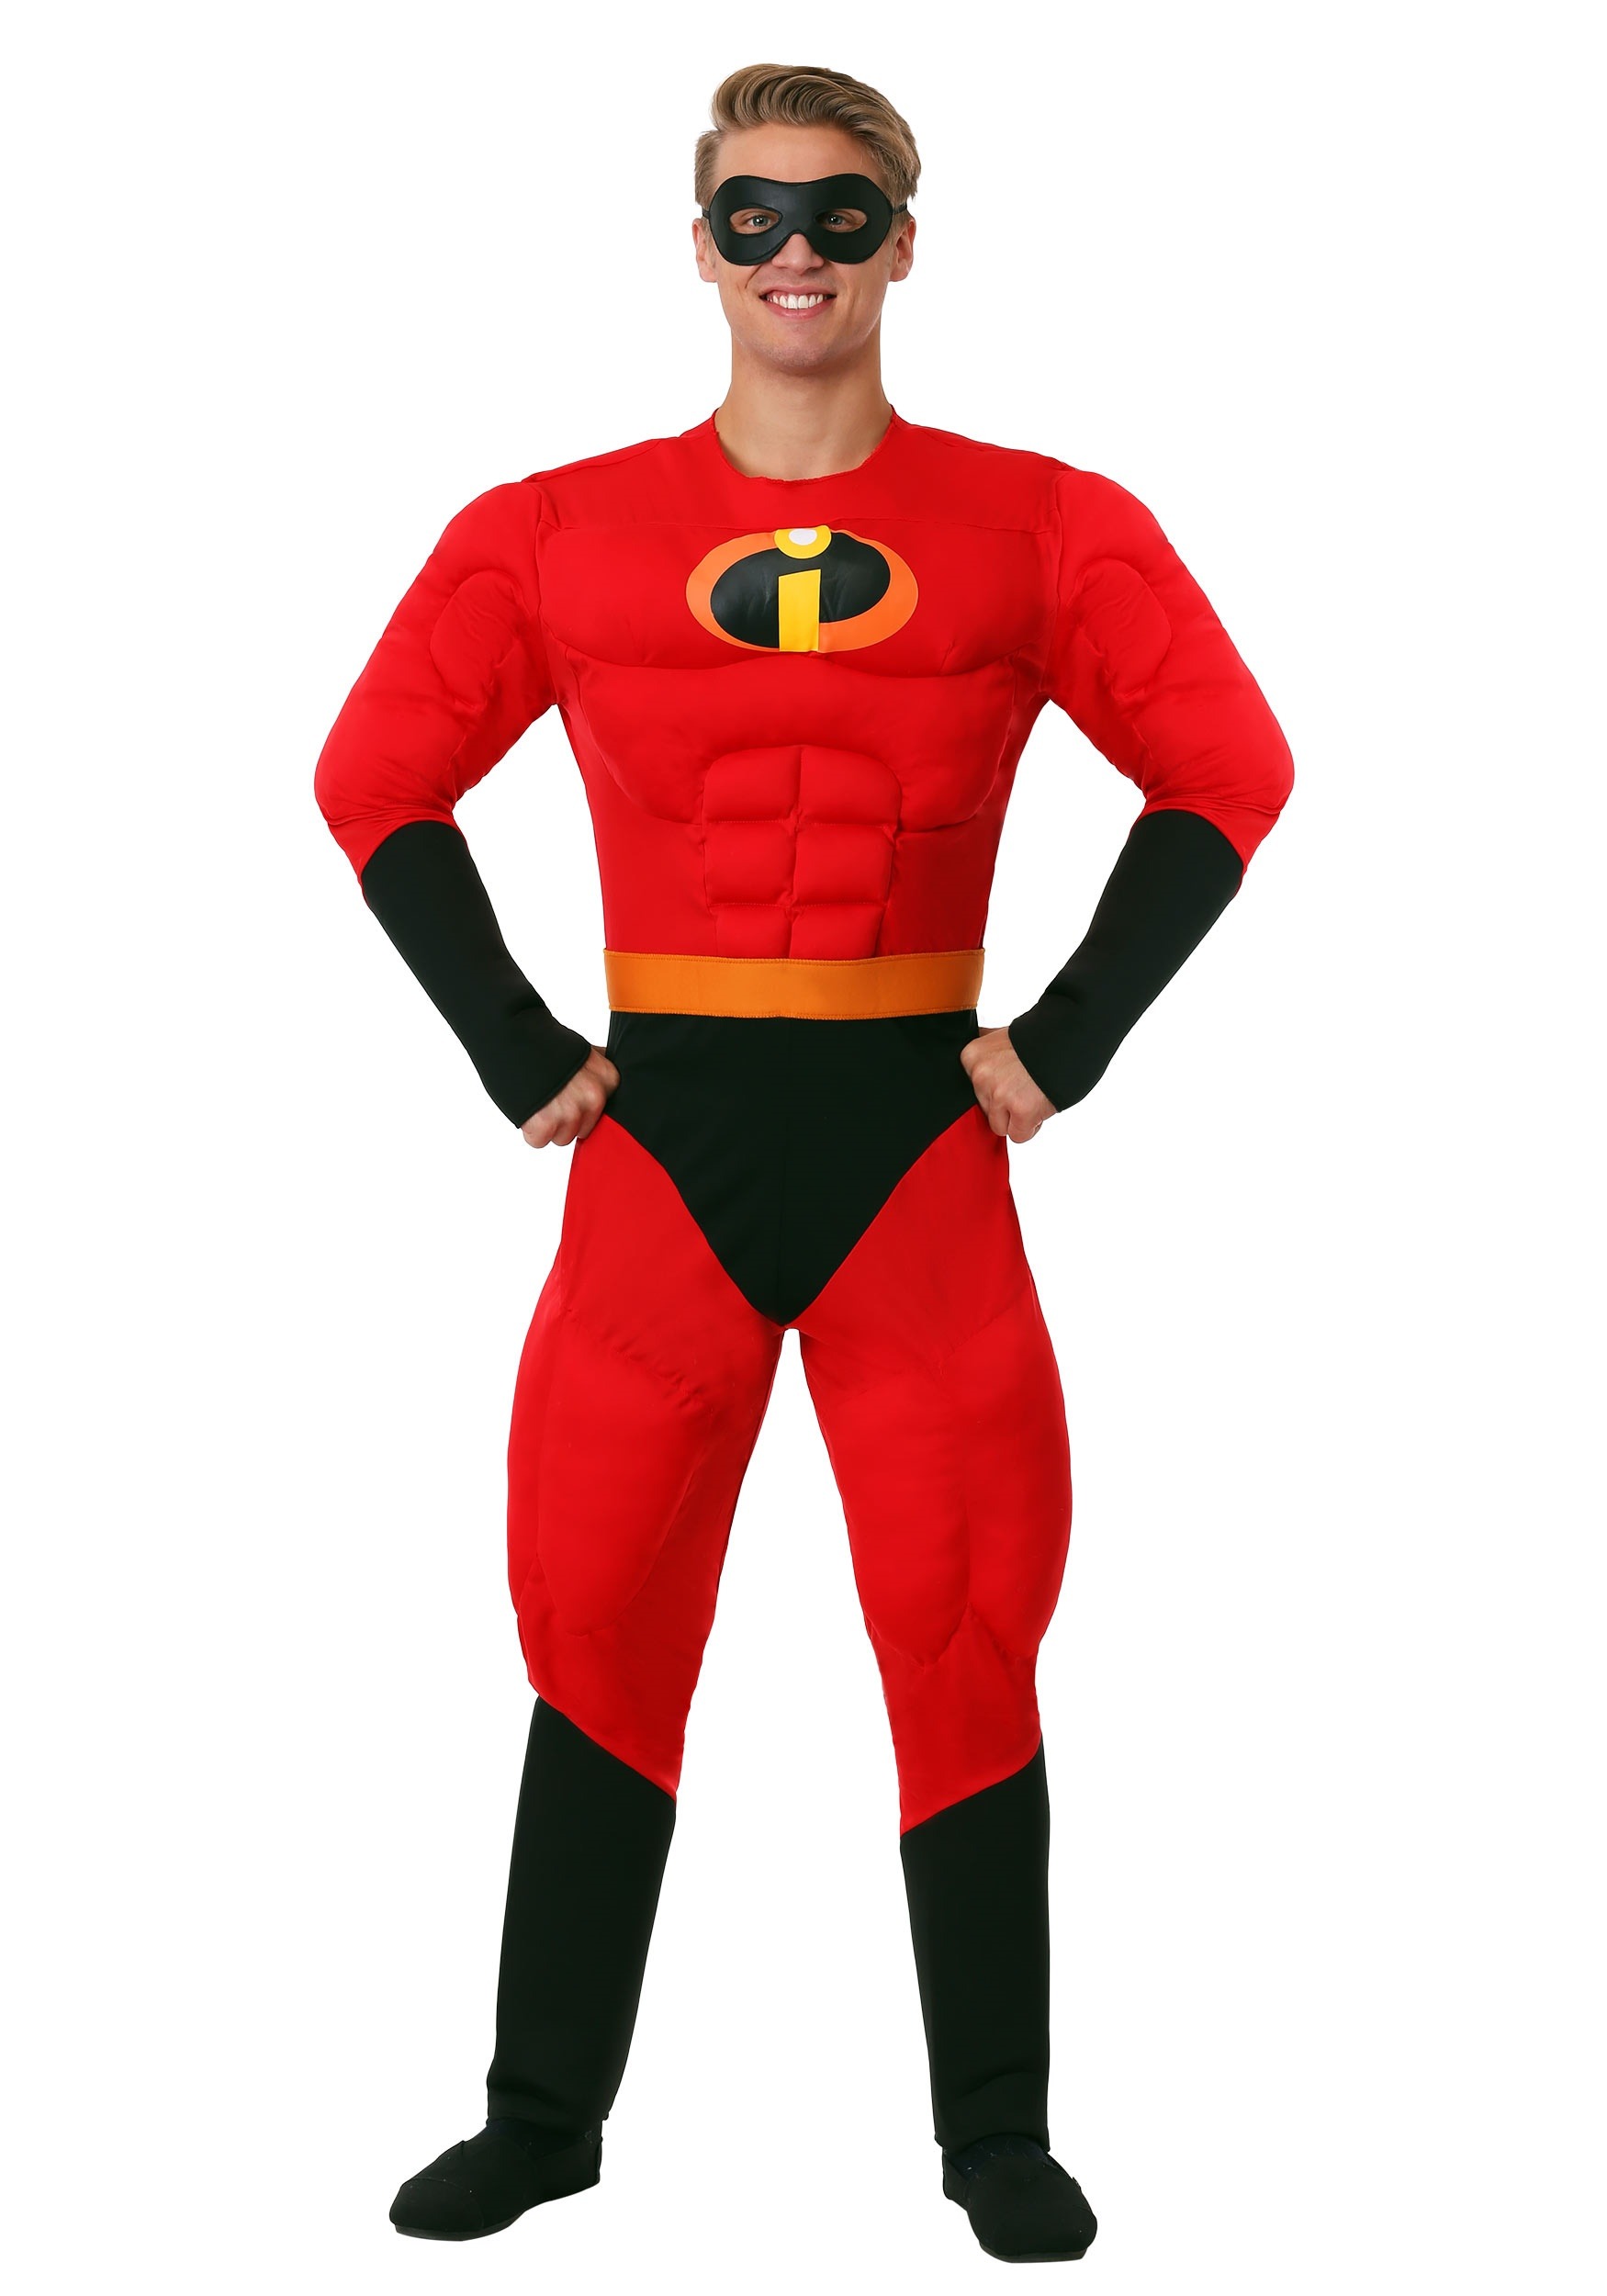 Photos - Fancy Dress Disney Disguise  The Incredibles Mr. Incredible  Costume for Men 